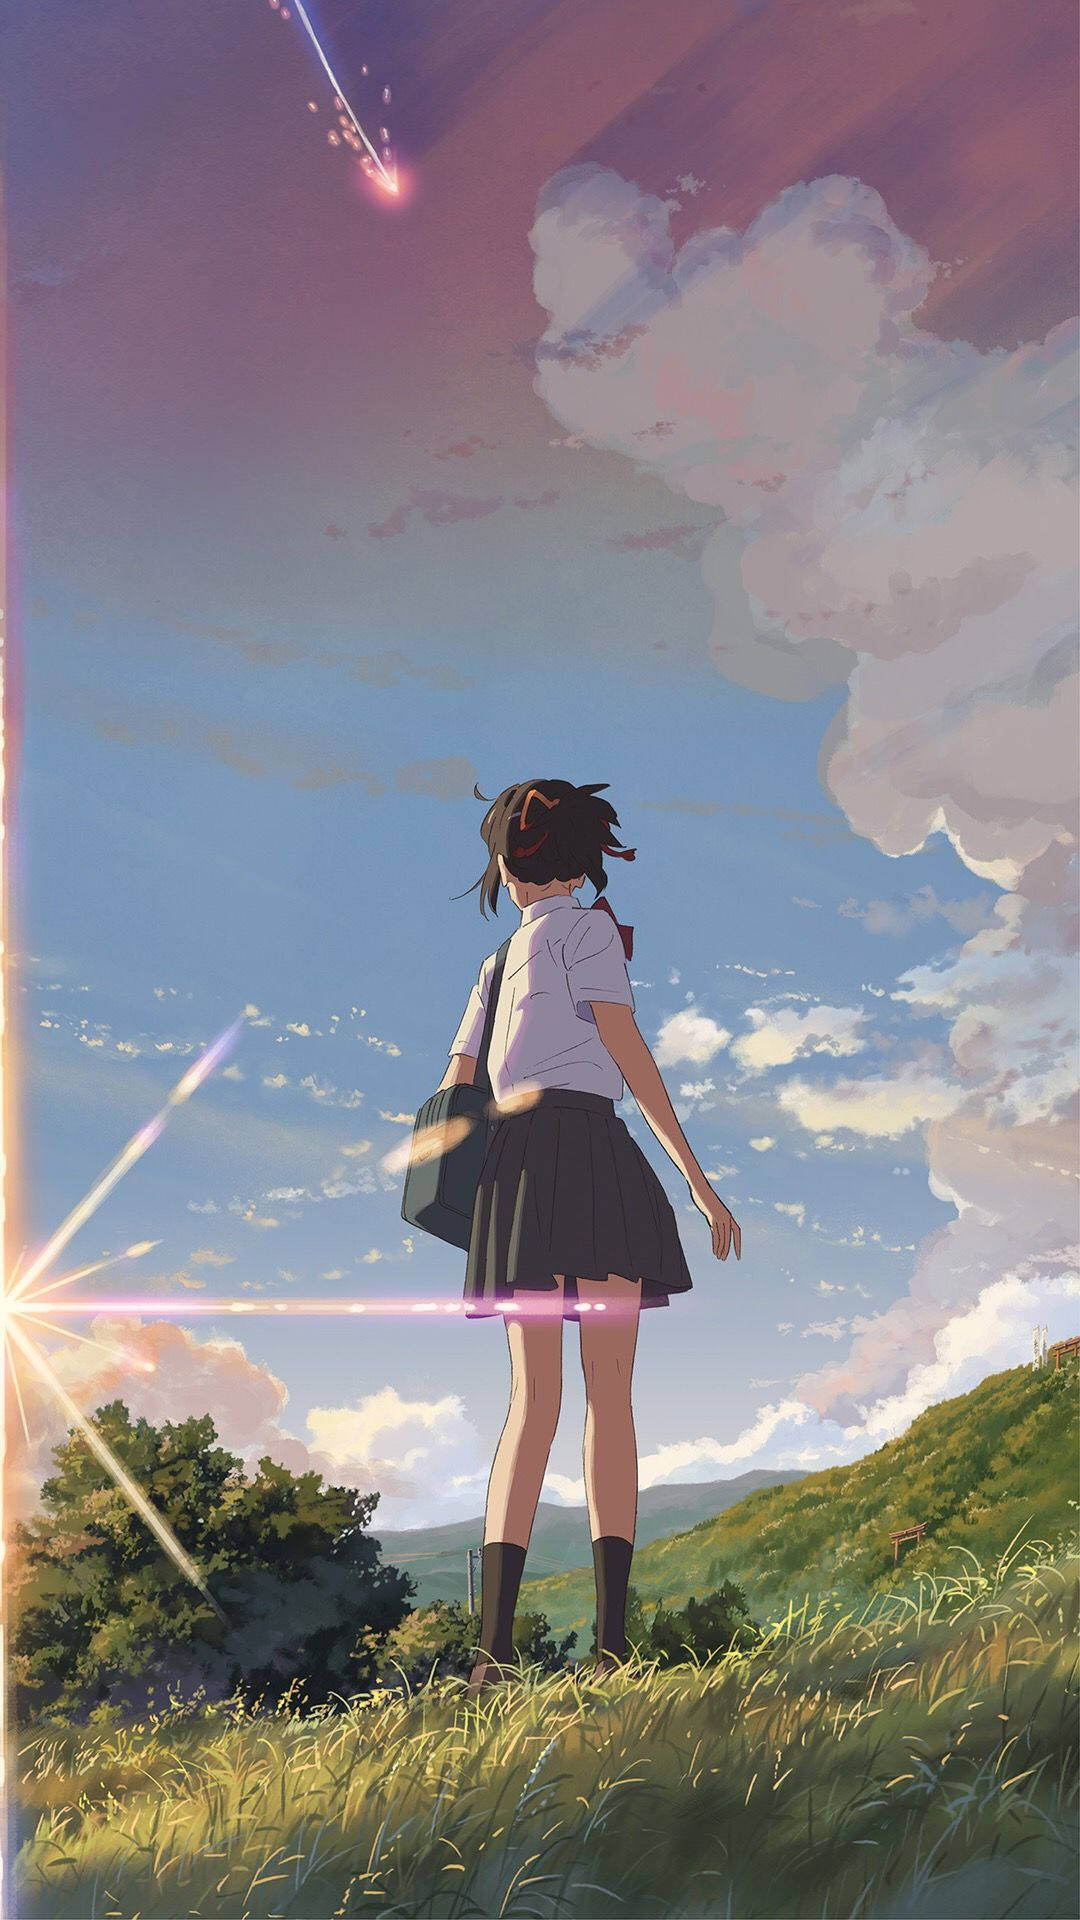 Top 999+ Your Name Wallpaper Full HD, 4K Free to Use